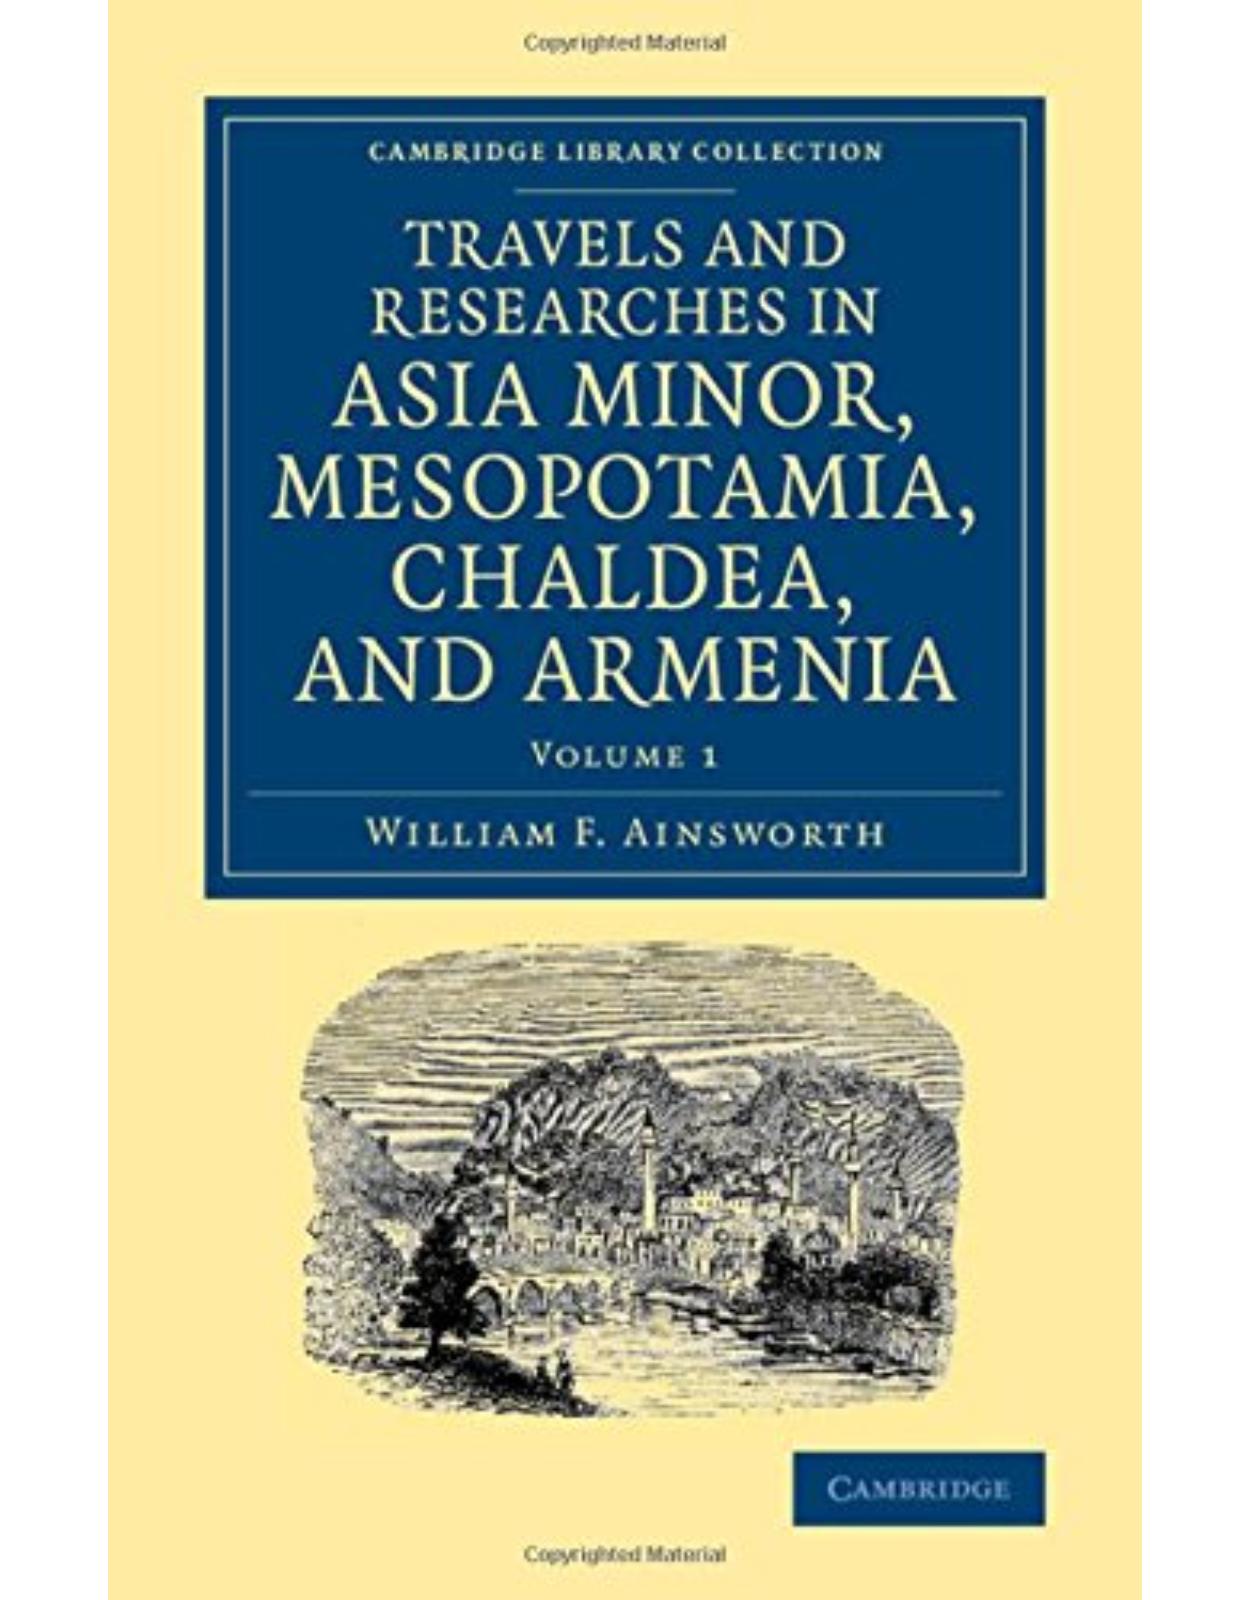 Travels and Researches in Asia Minor, Mesopotamia, Chaldea, and Armenia: Volume 1 (Cambridge Library Collection - Archaeology) 